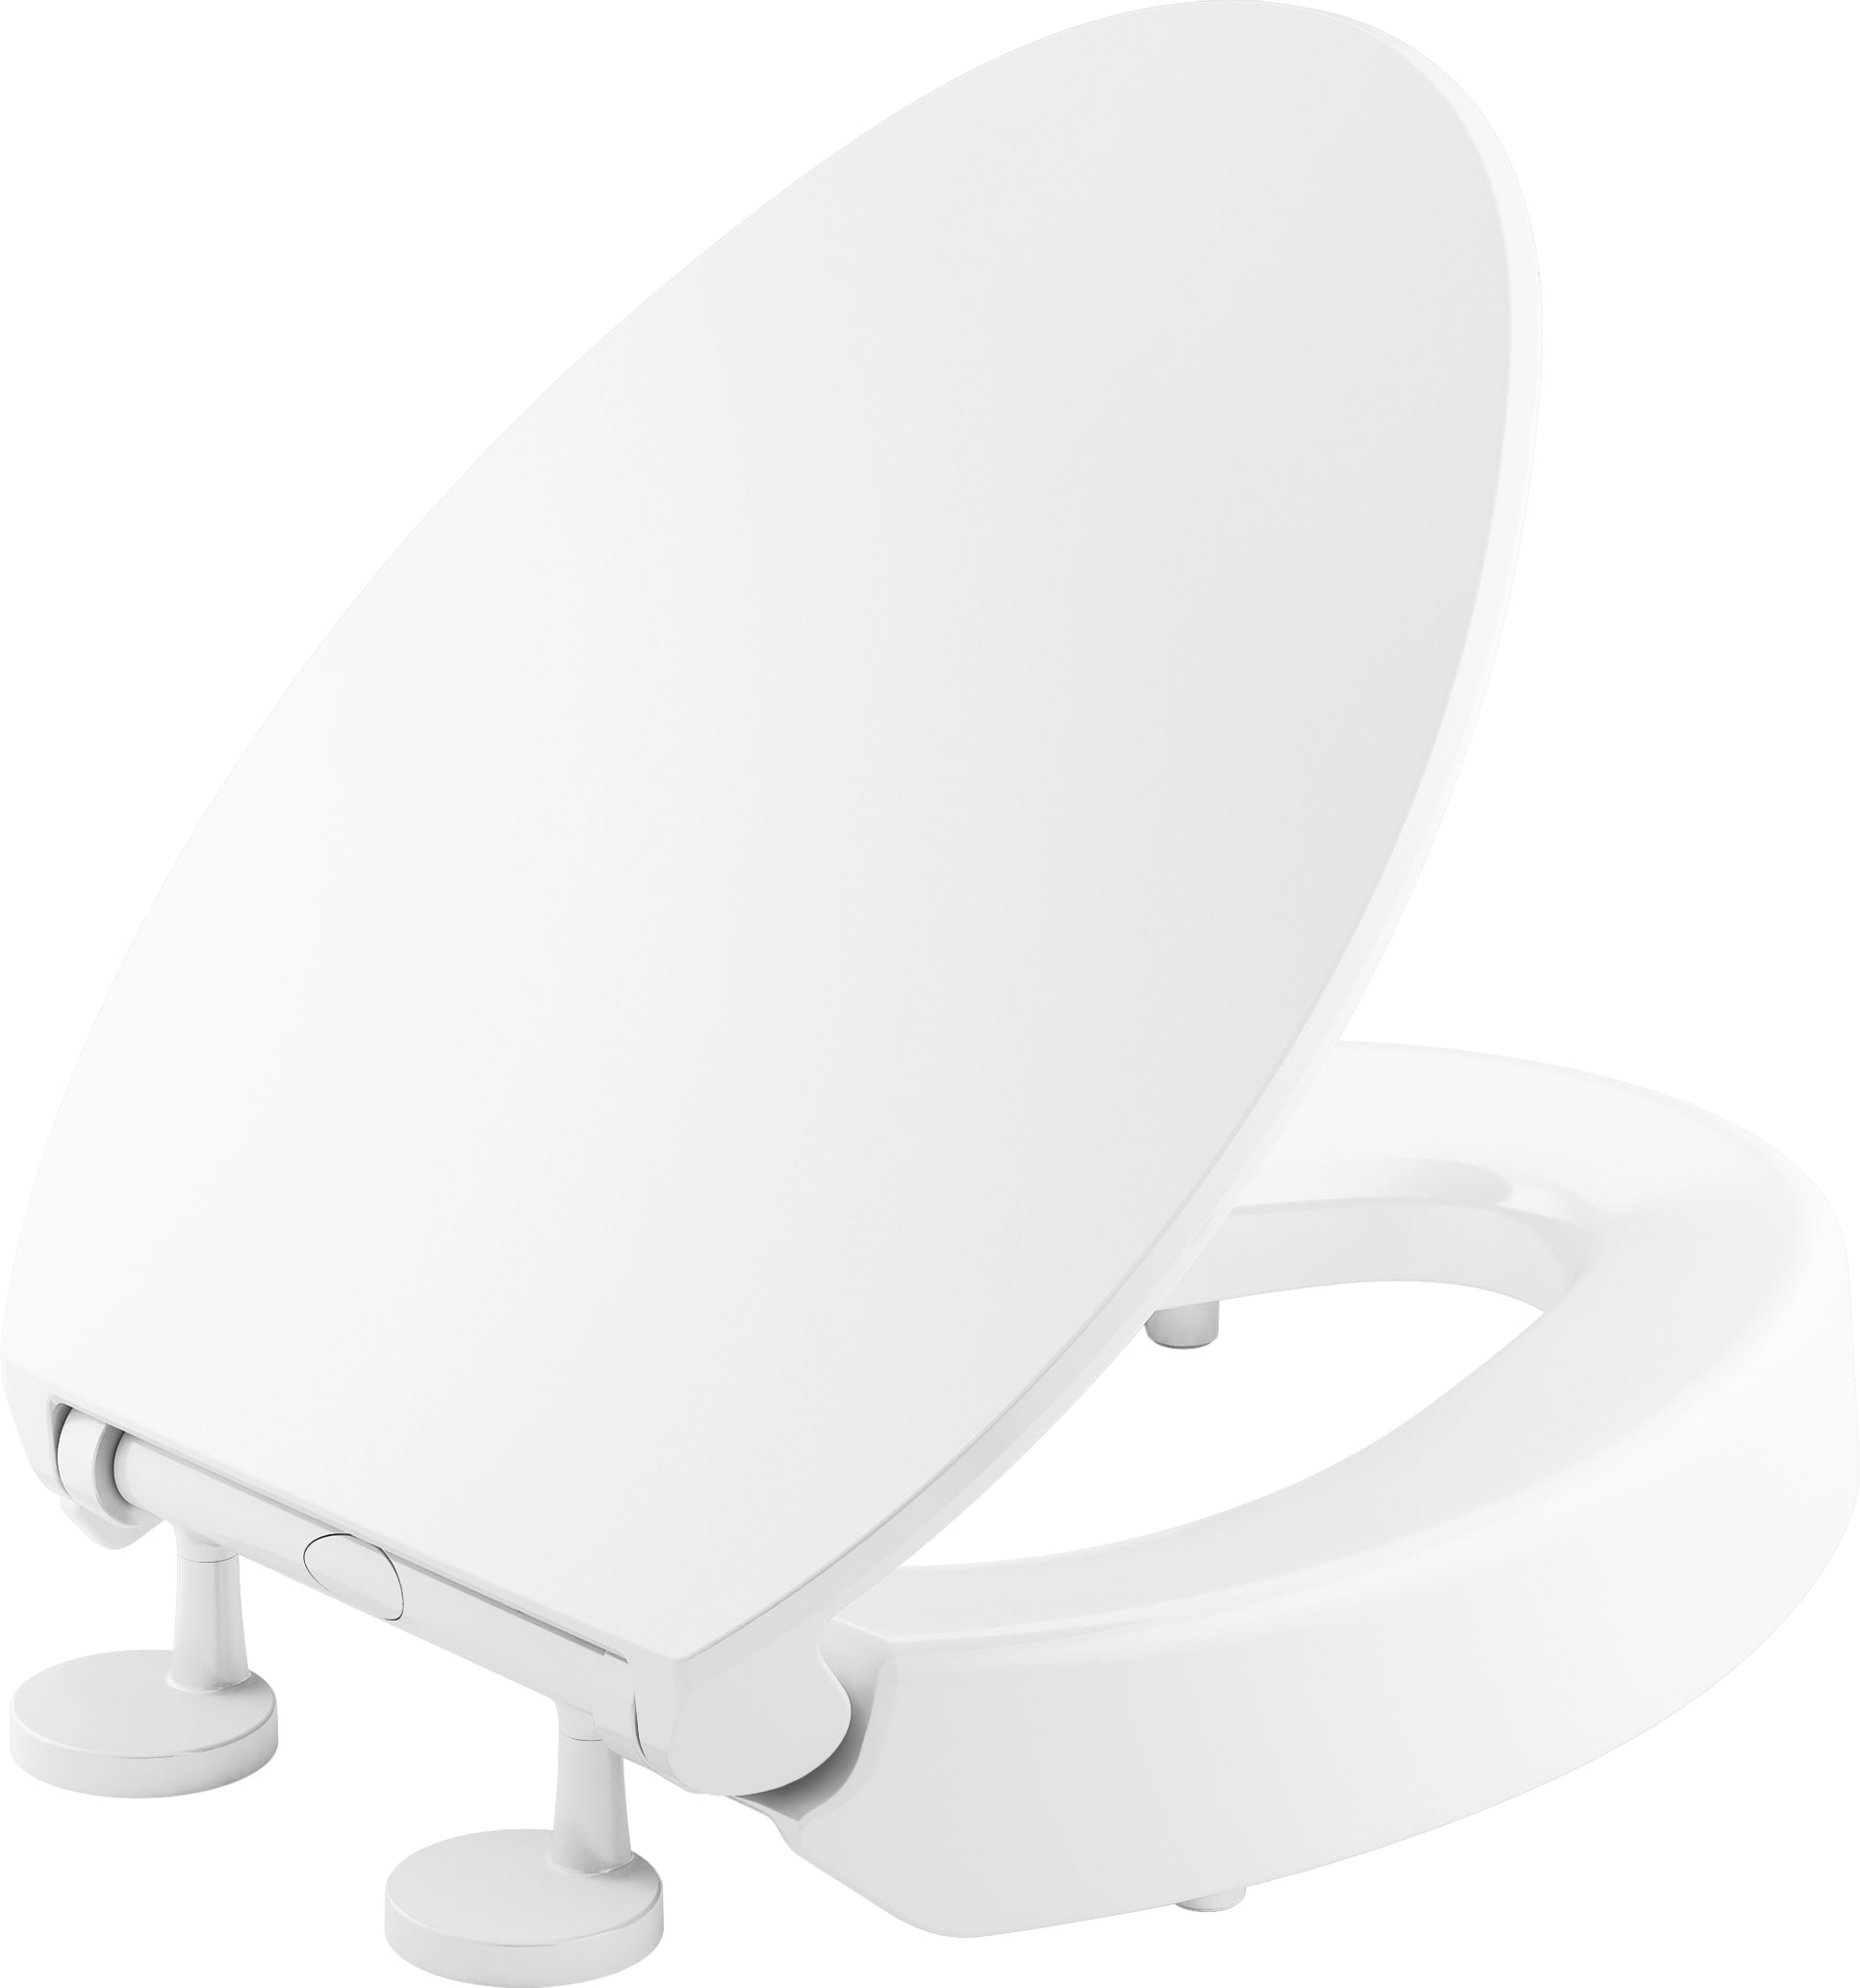 HARO, ELONGATED Toilet Seat, Slow-Close-Seat, Heavy-Duty up to 550 lbs,  Quick-Release & Easy Clean, Fast-Fix-Hinge, No-Slip Bumpers, White, Advanced (PP)